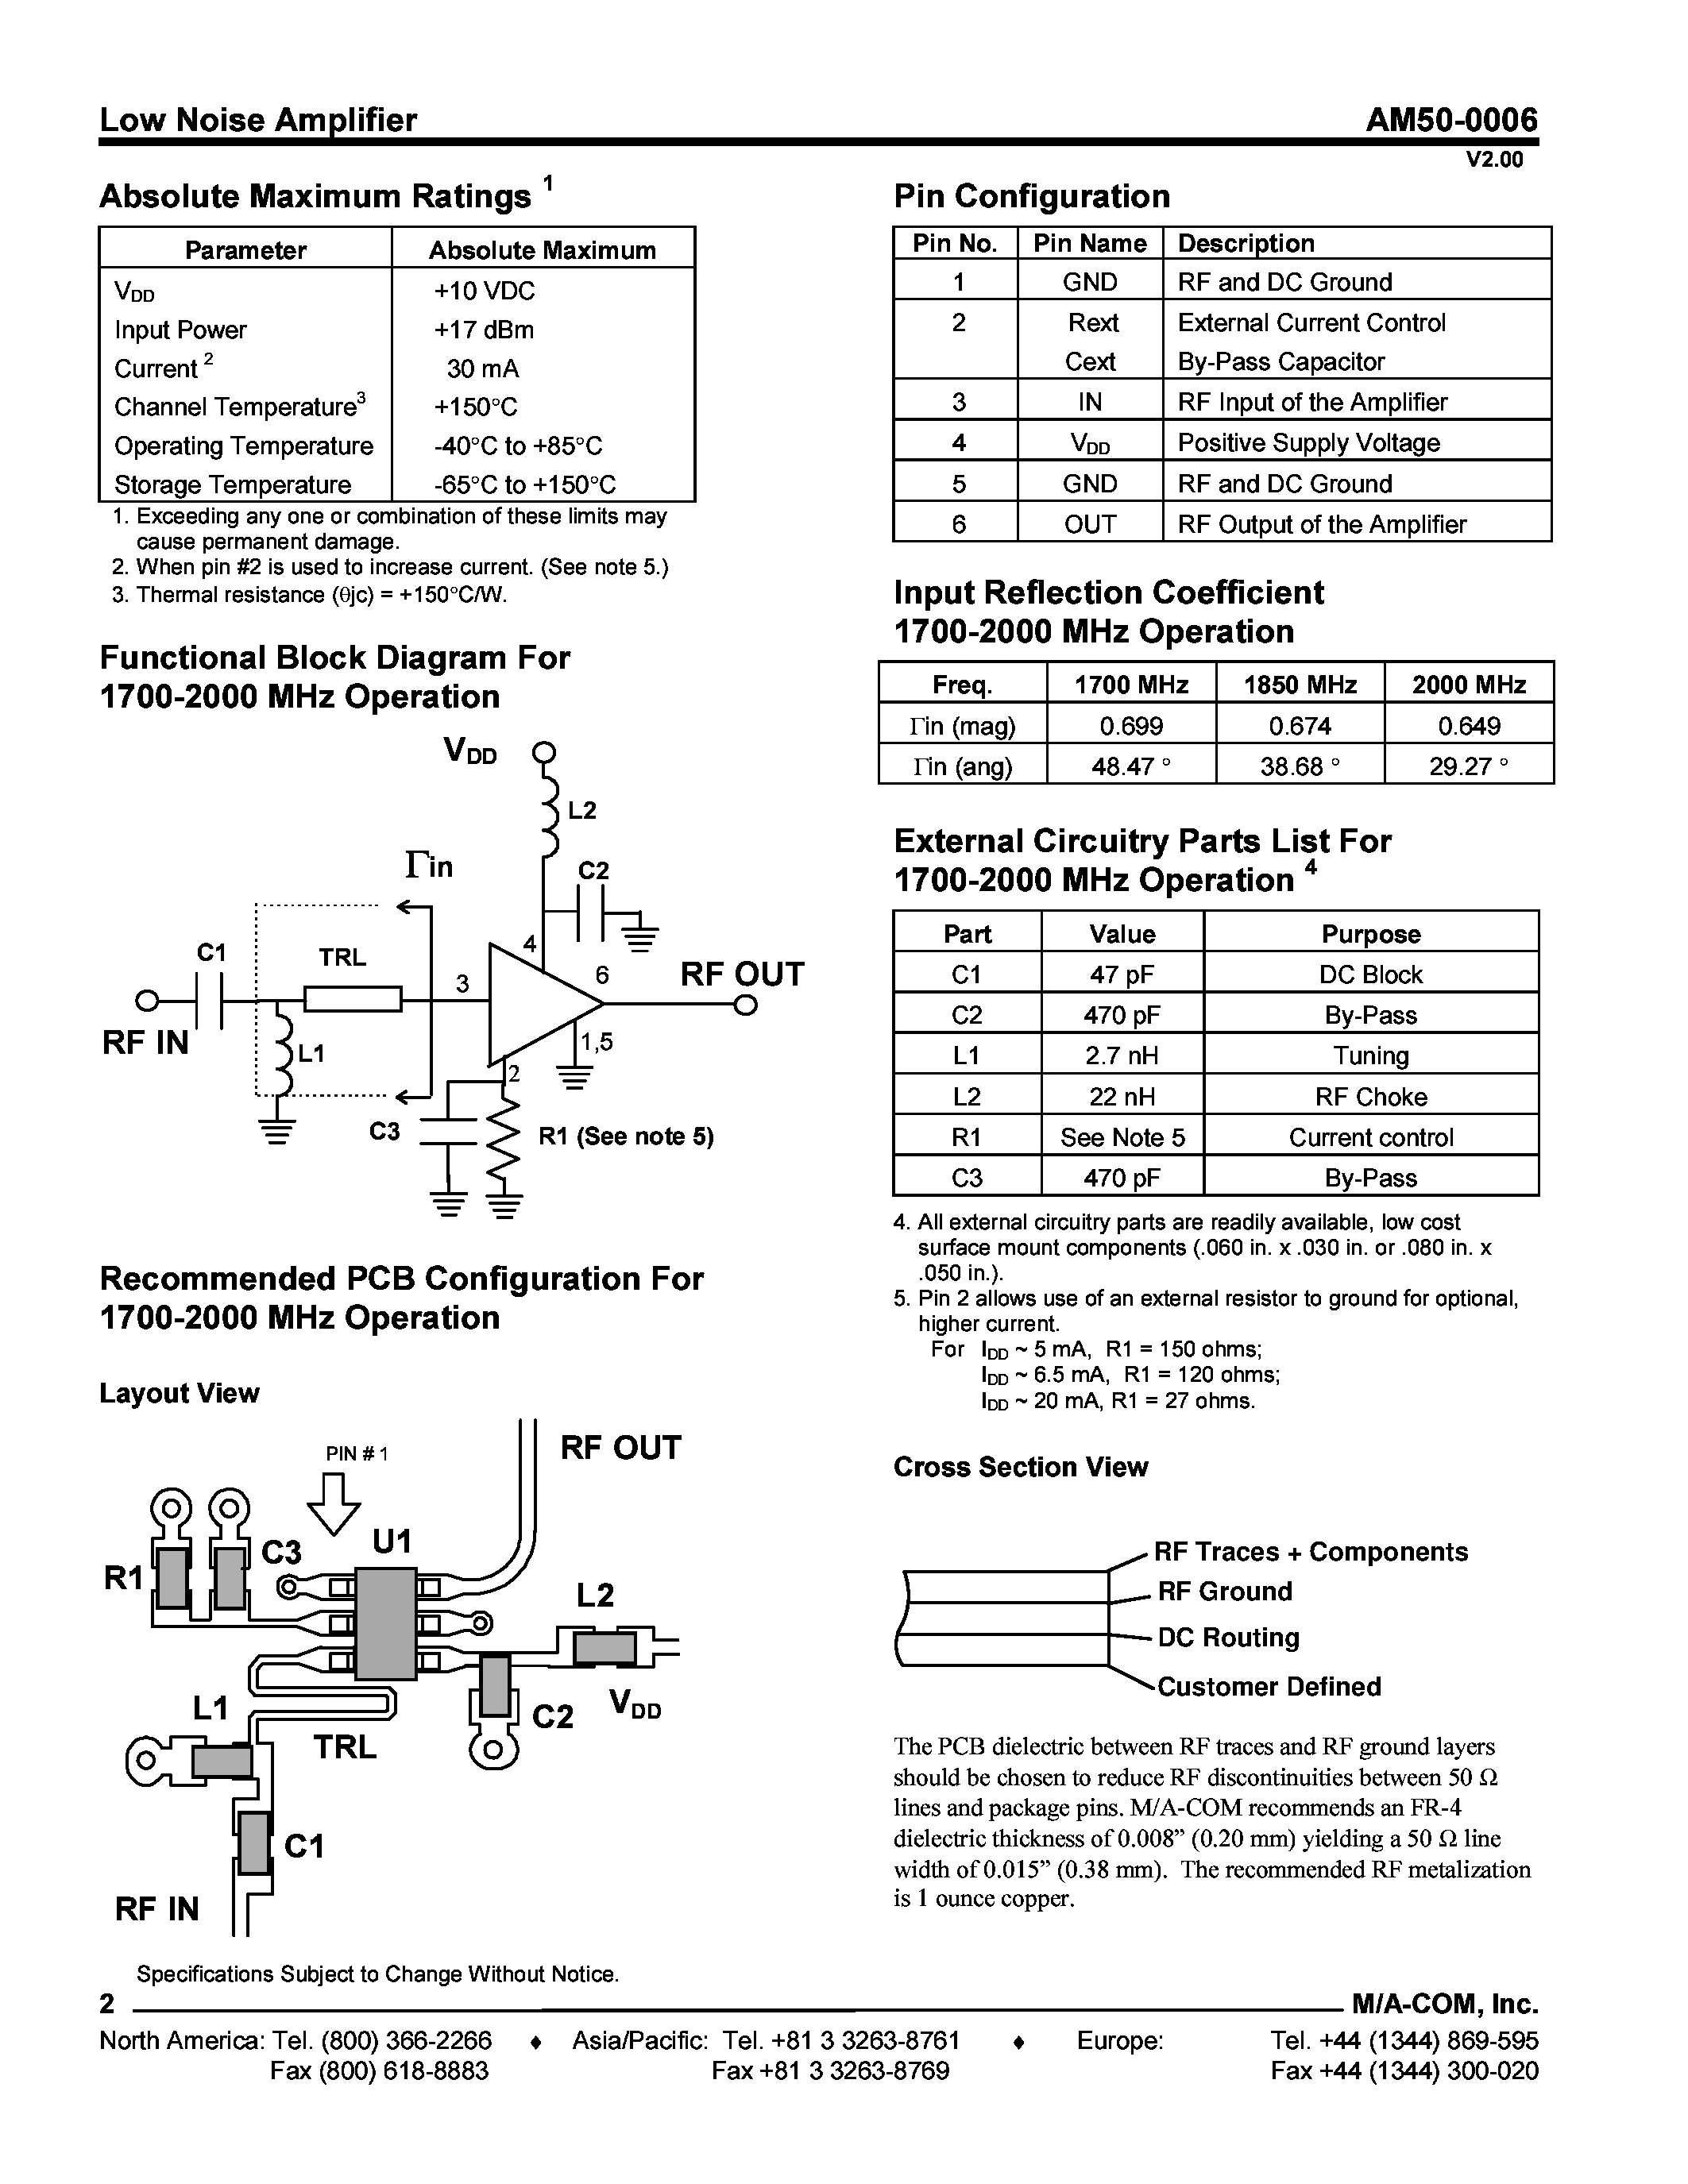 Datasheet AM50-0006TR - Low Noise Amplifier 1400 - 2000 MHz page 2